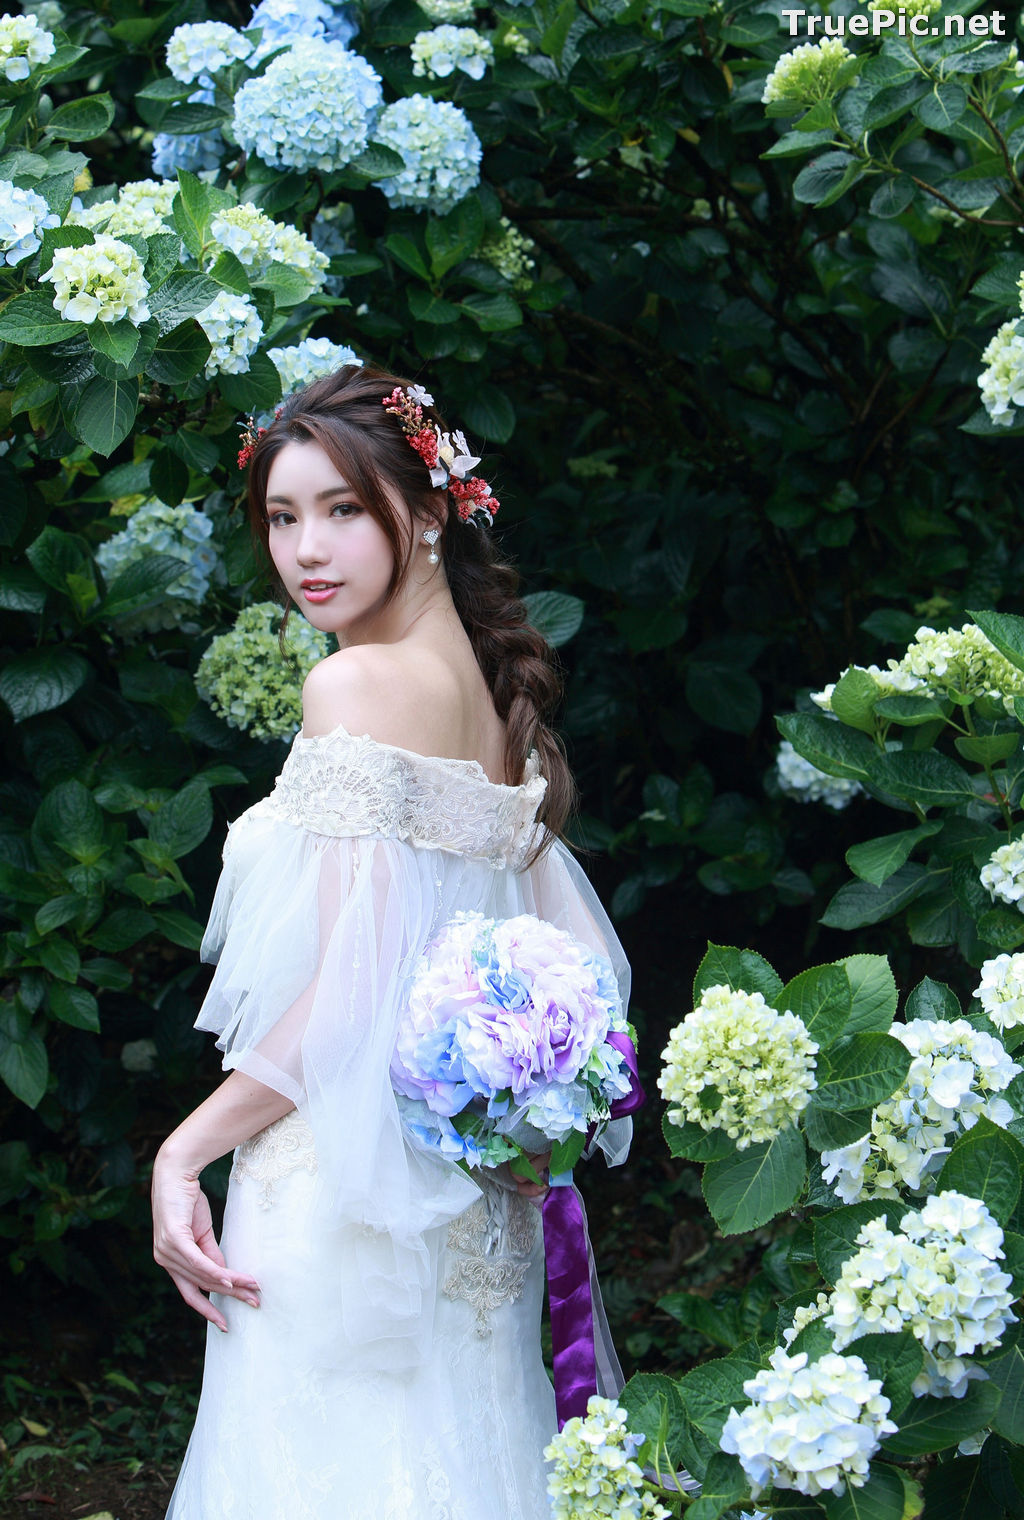 Image Taiwanese Model - 張倫甄 - Beautiful Bride and Hydrangea Flowers - TruePic.net - Picture-23